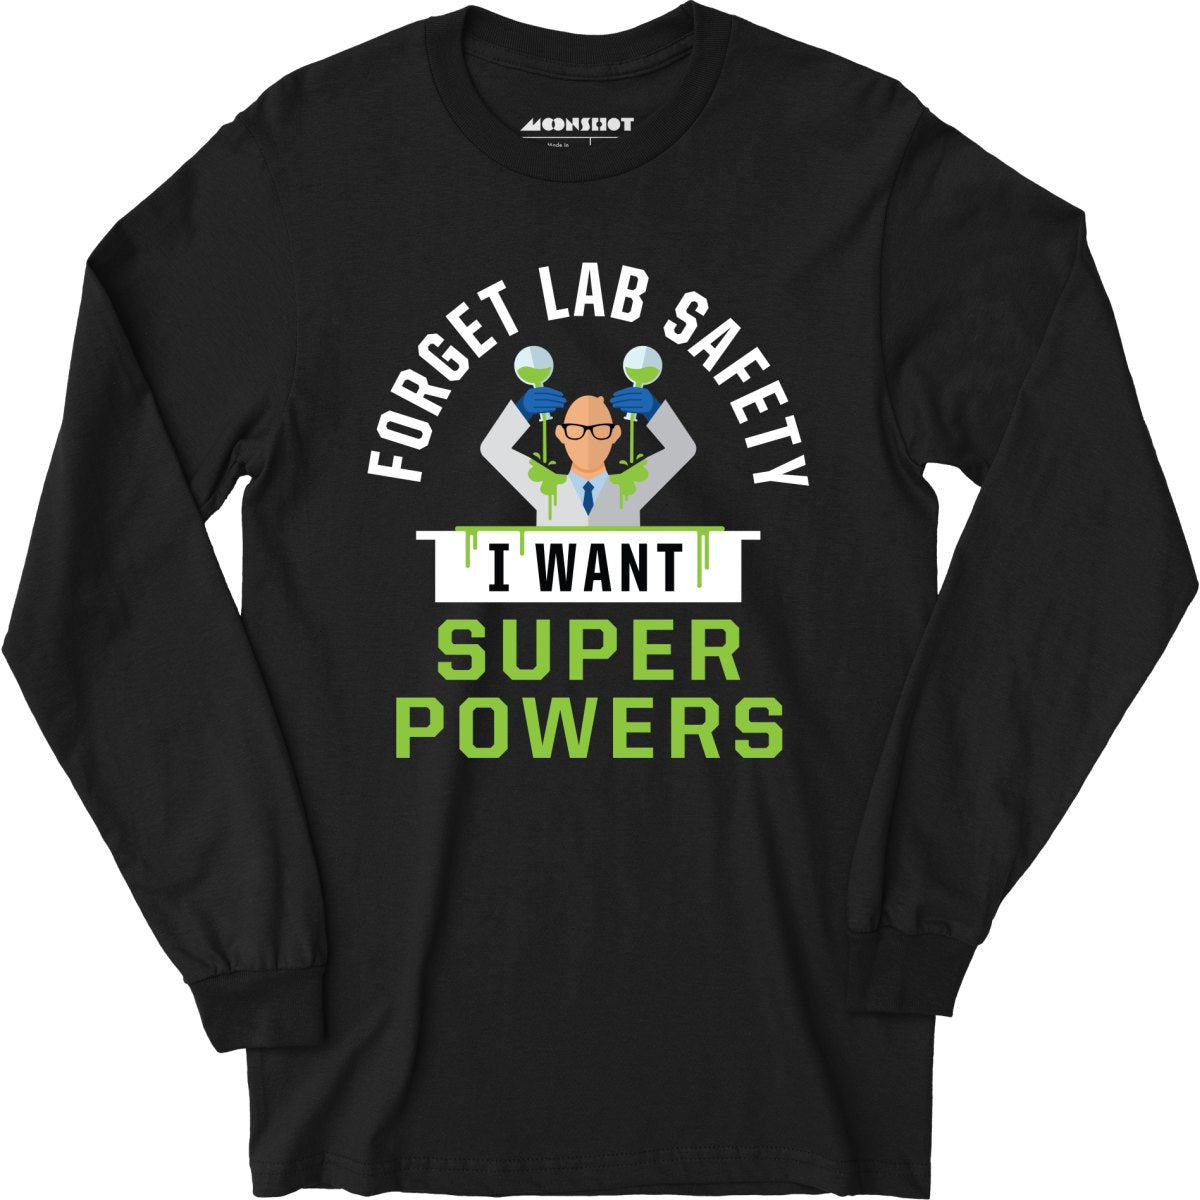 Forget Lab Safety I Want Super Powers - Long Sleeve T-Shirt